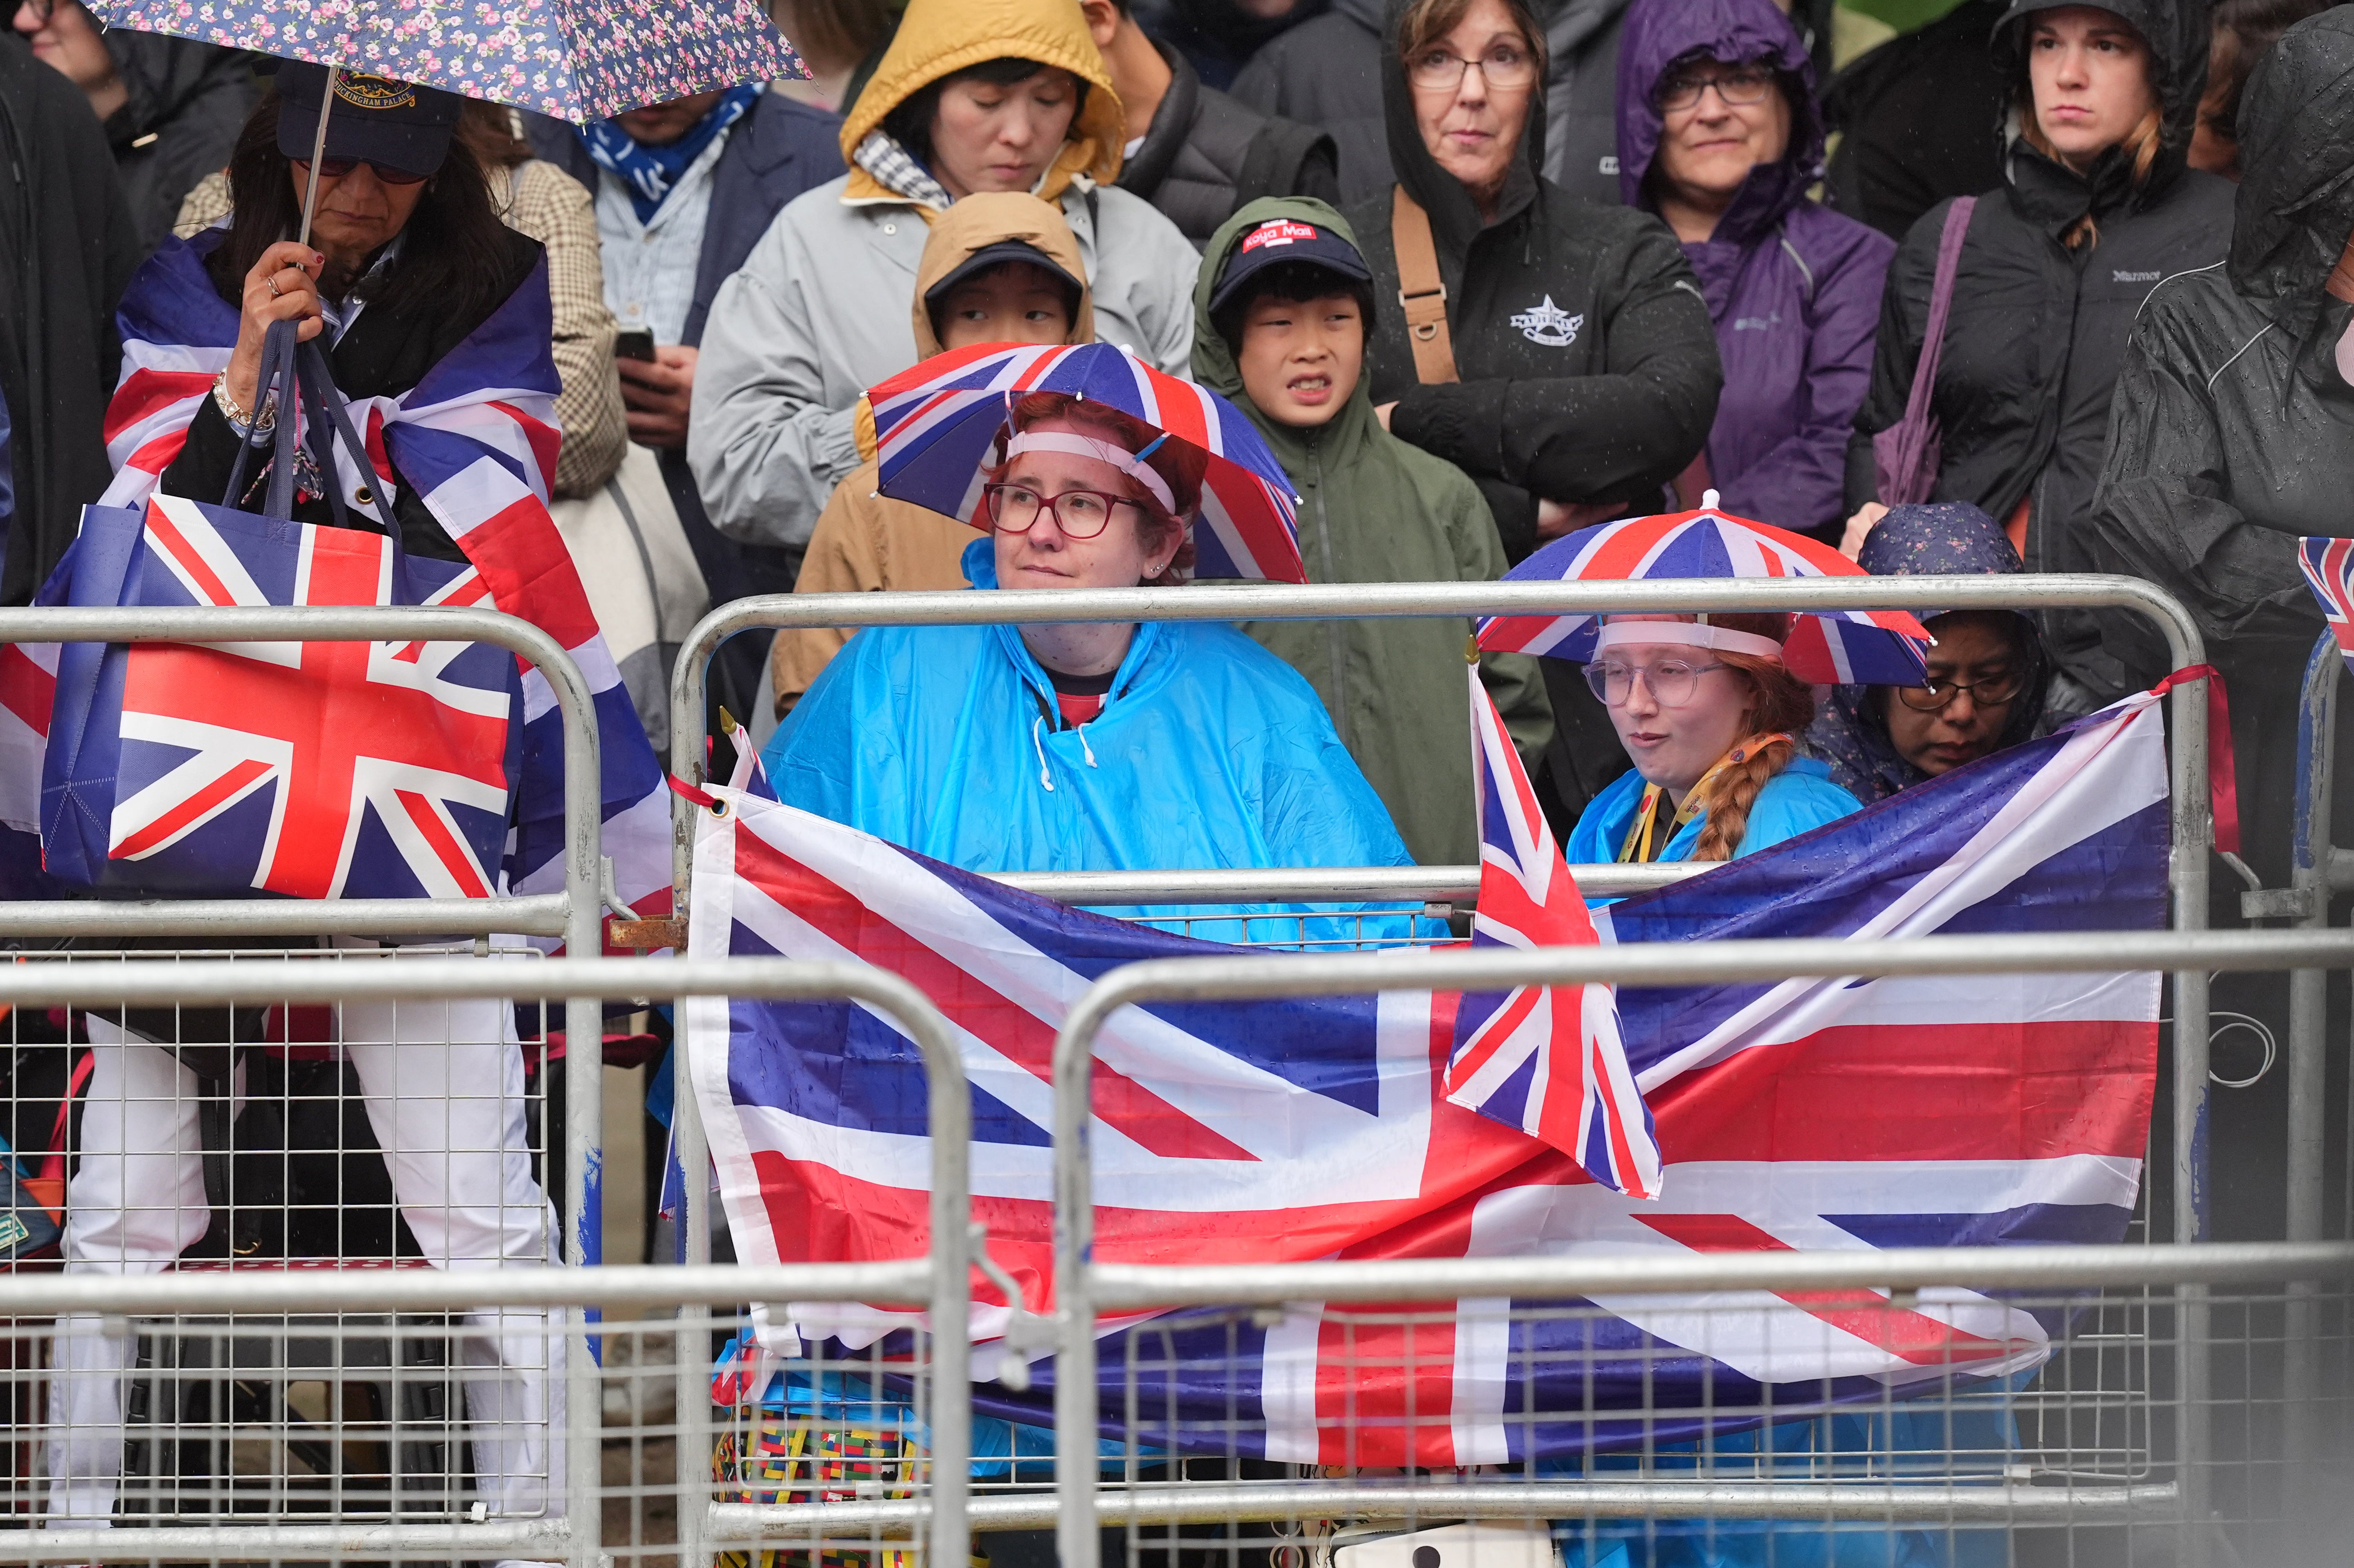 Many people with umbrellas waited for the rain to catch a glimpse of the Royal Family